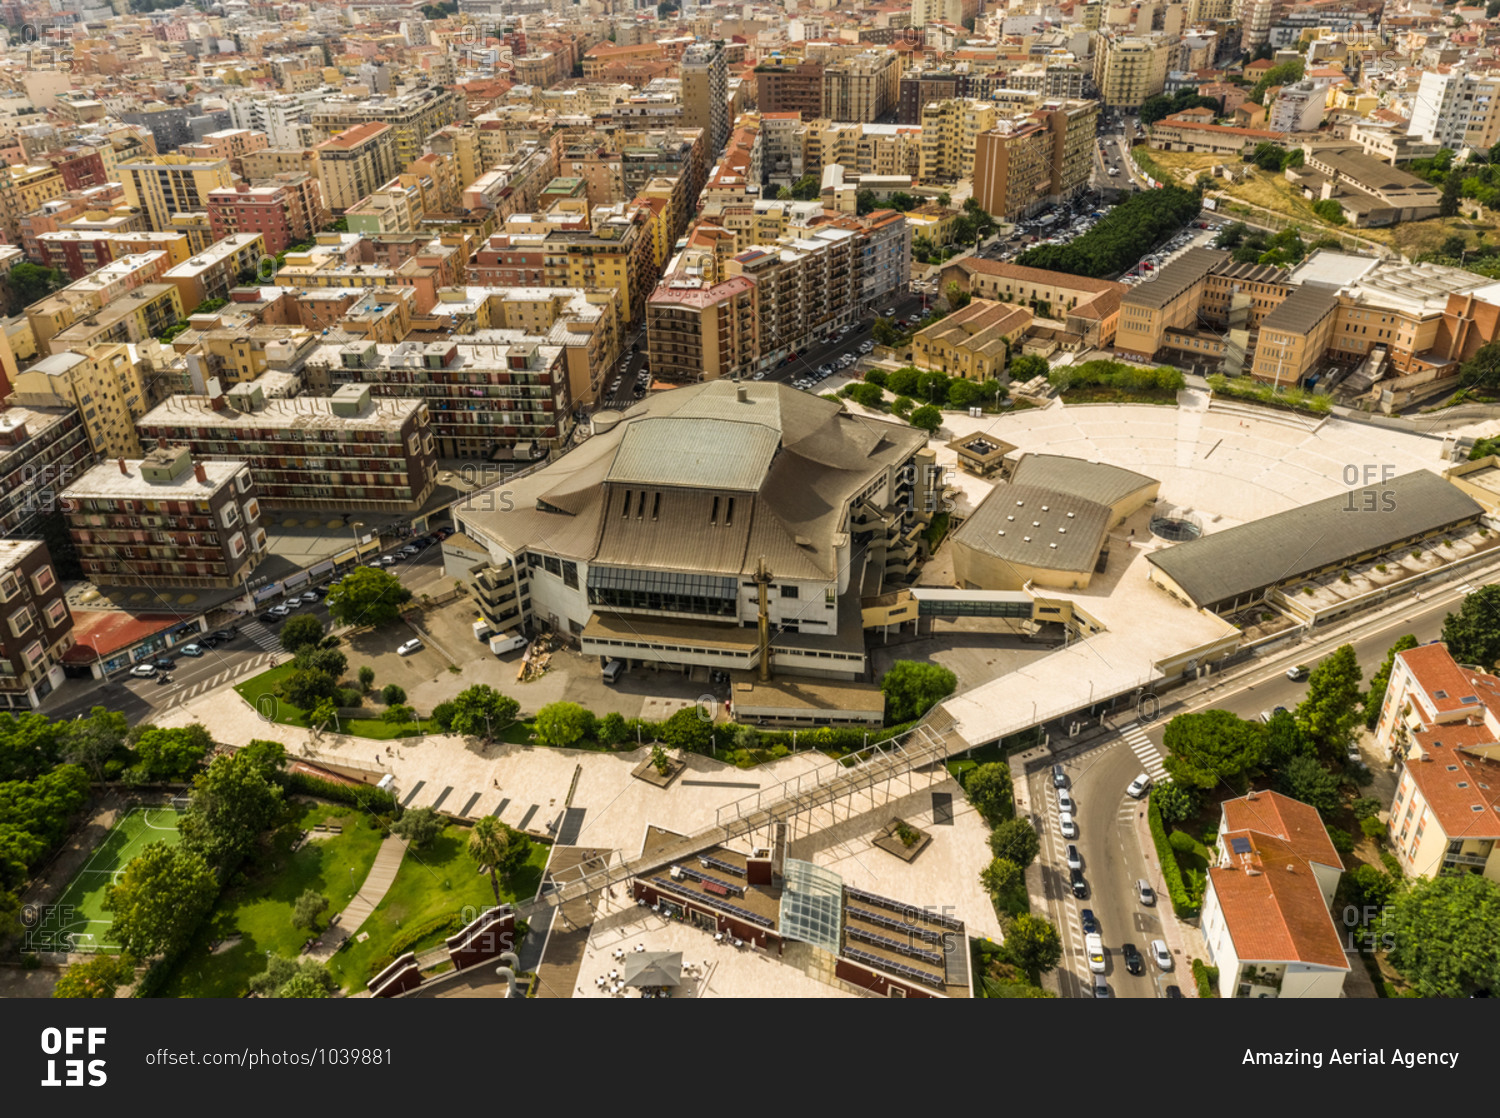 Aerial view of urban setting in the city of Cagliari in Sardinia, Italy.